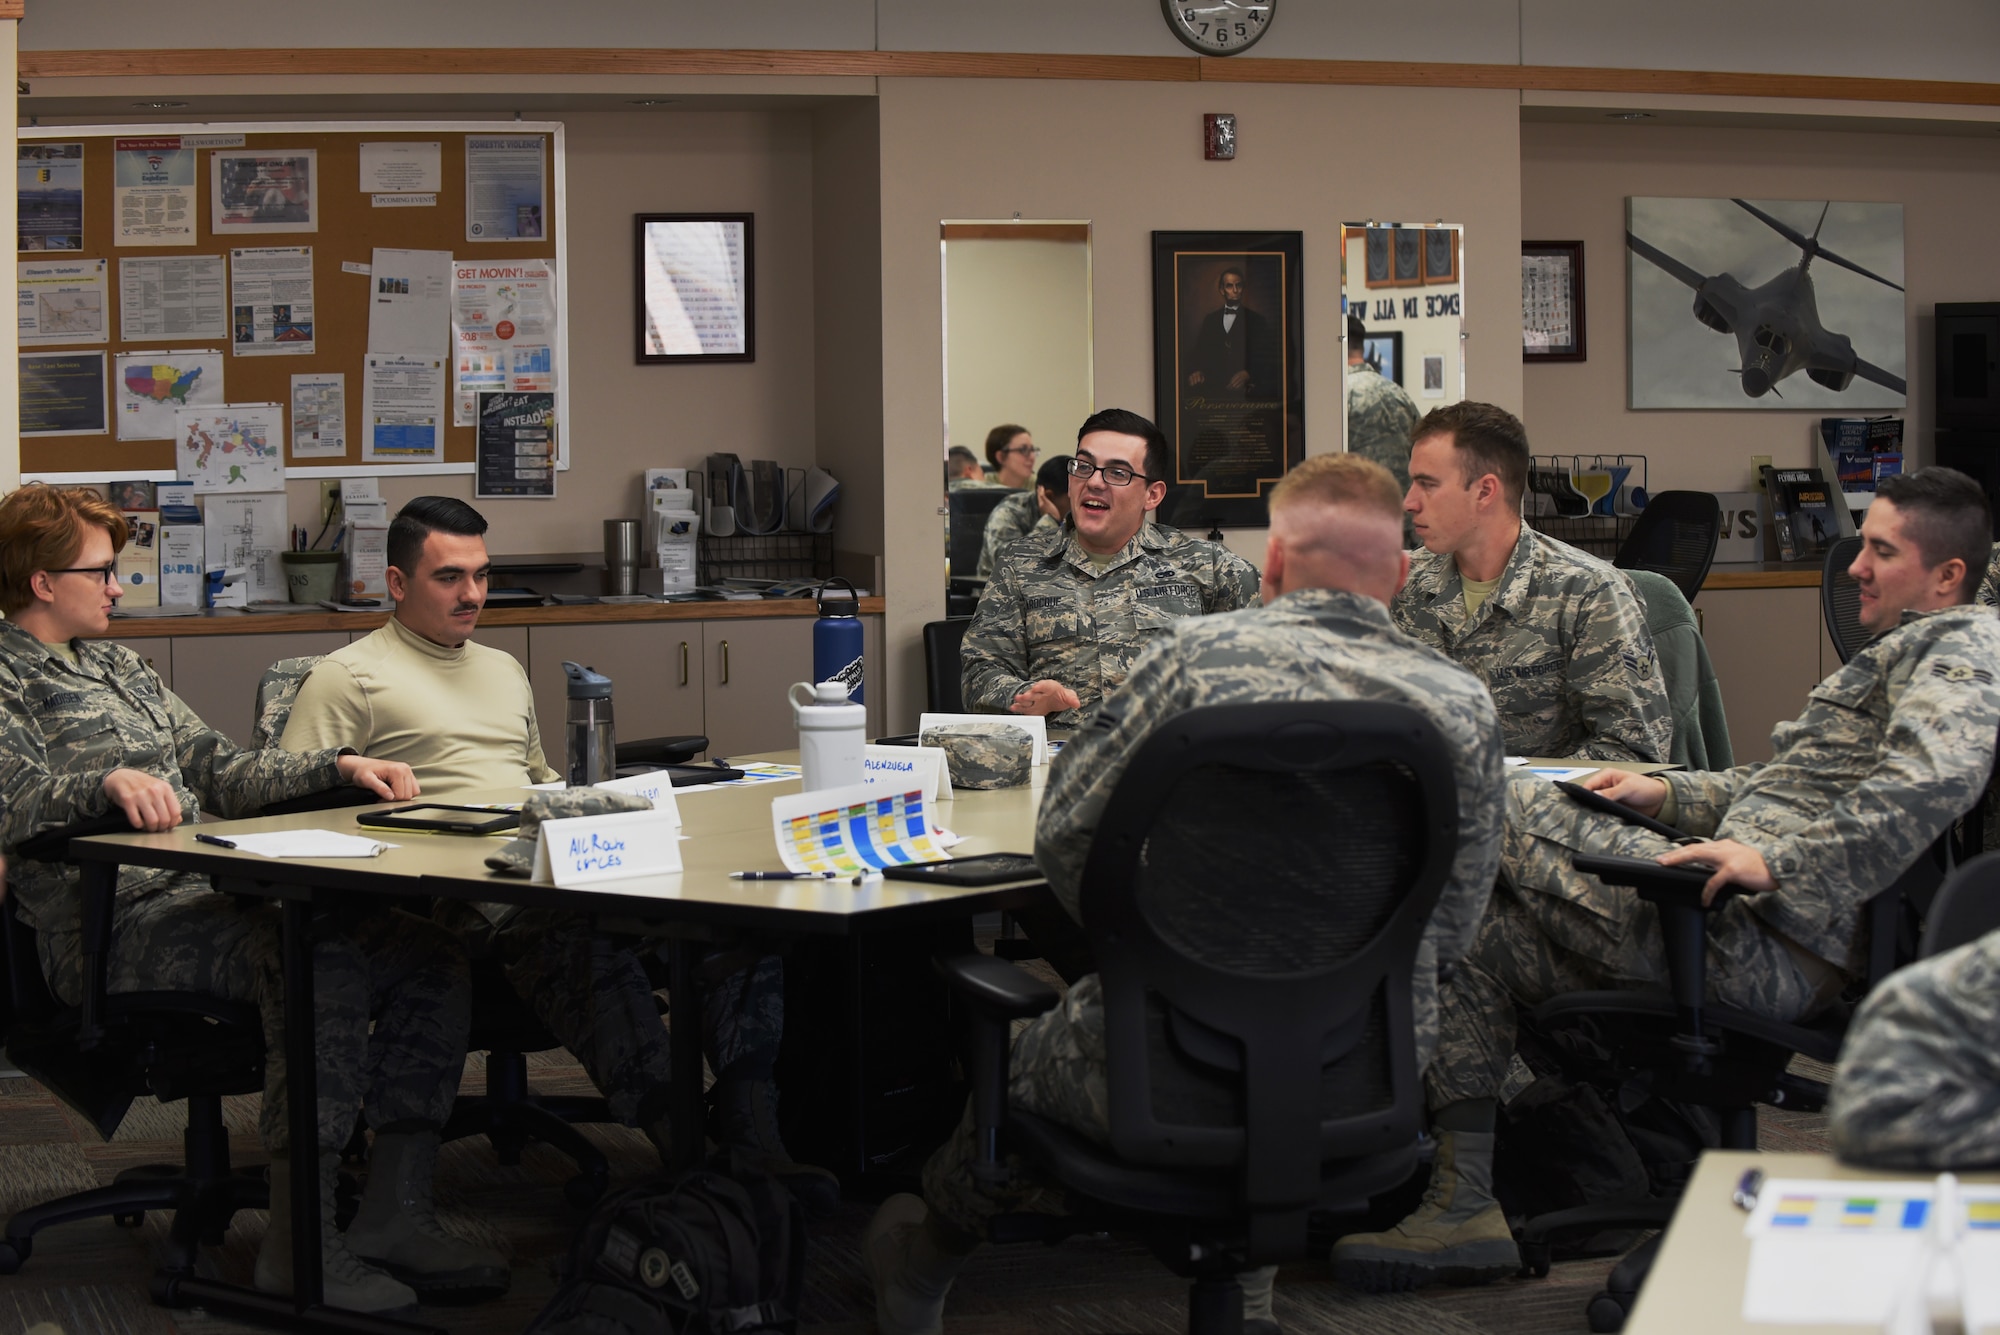 Airmen participate in a group exercise during the First Term Airmen Course at the Rushmore Center on Ellsworth Air Force Base, S.D., Oct. 22, 2018. . The FTAC course is a mandatory, weeklong program that is packed with professional development guidance, life-skills briefings and visits from base agencies to aid new Airmen with getting their careers started. (U.S. Air Force photo by Airman 1st Class Christina Bennett)